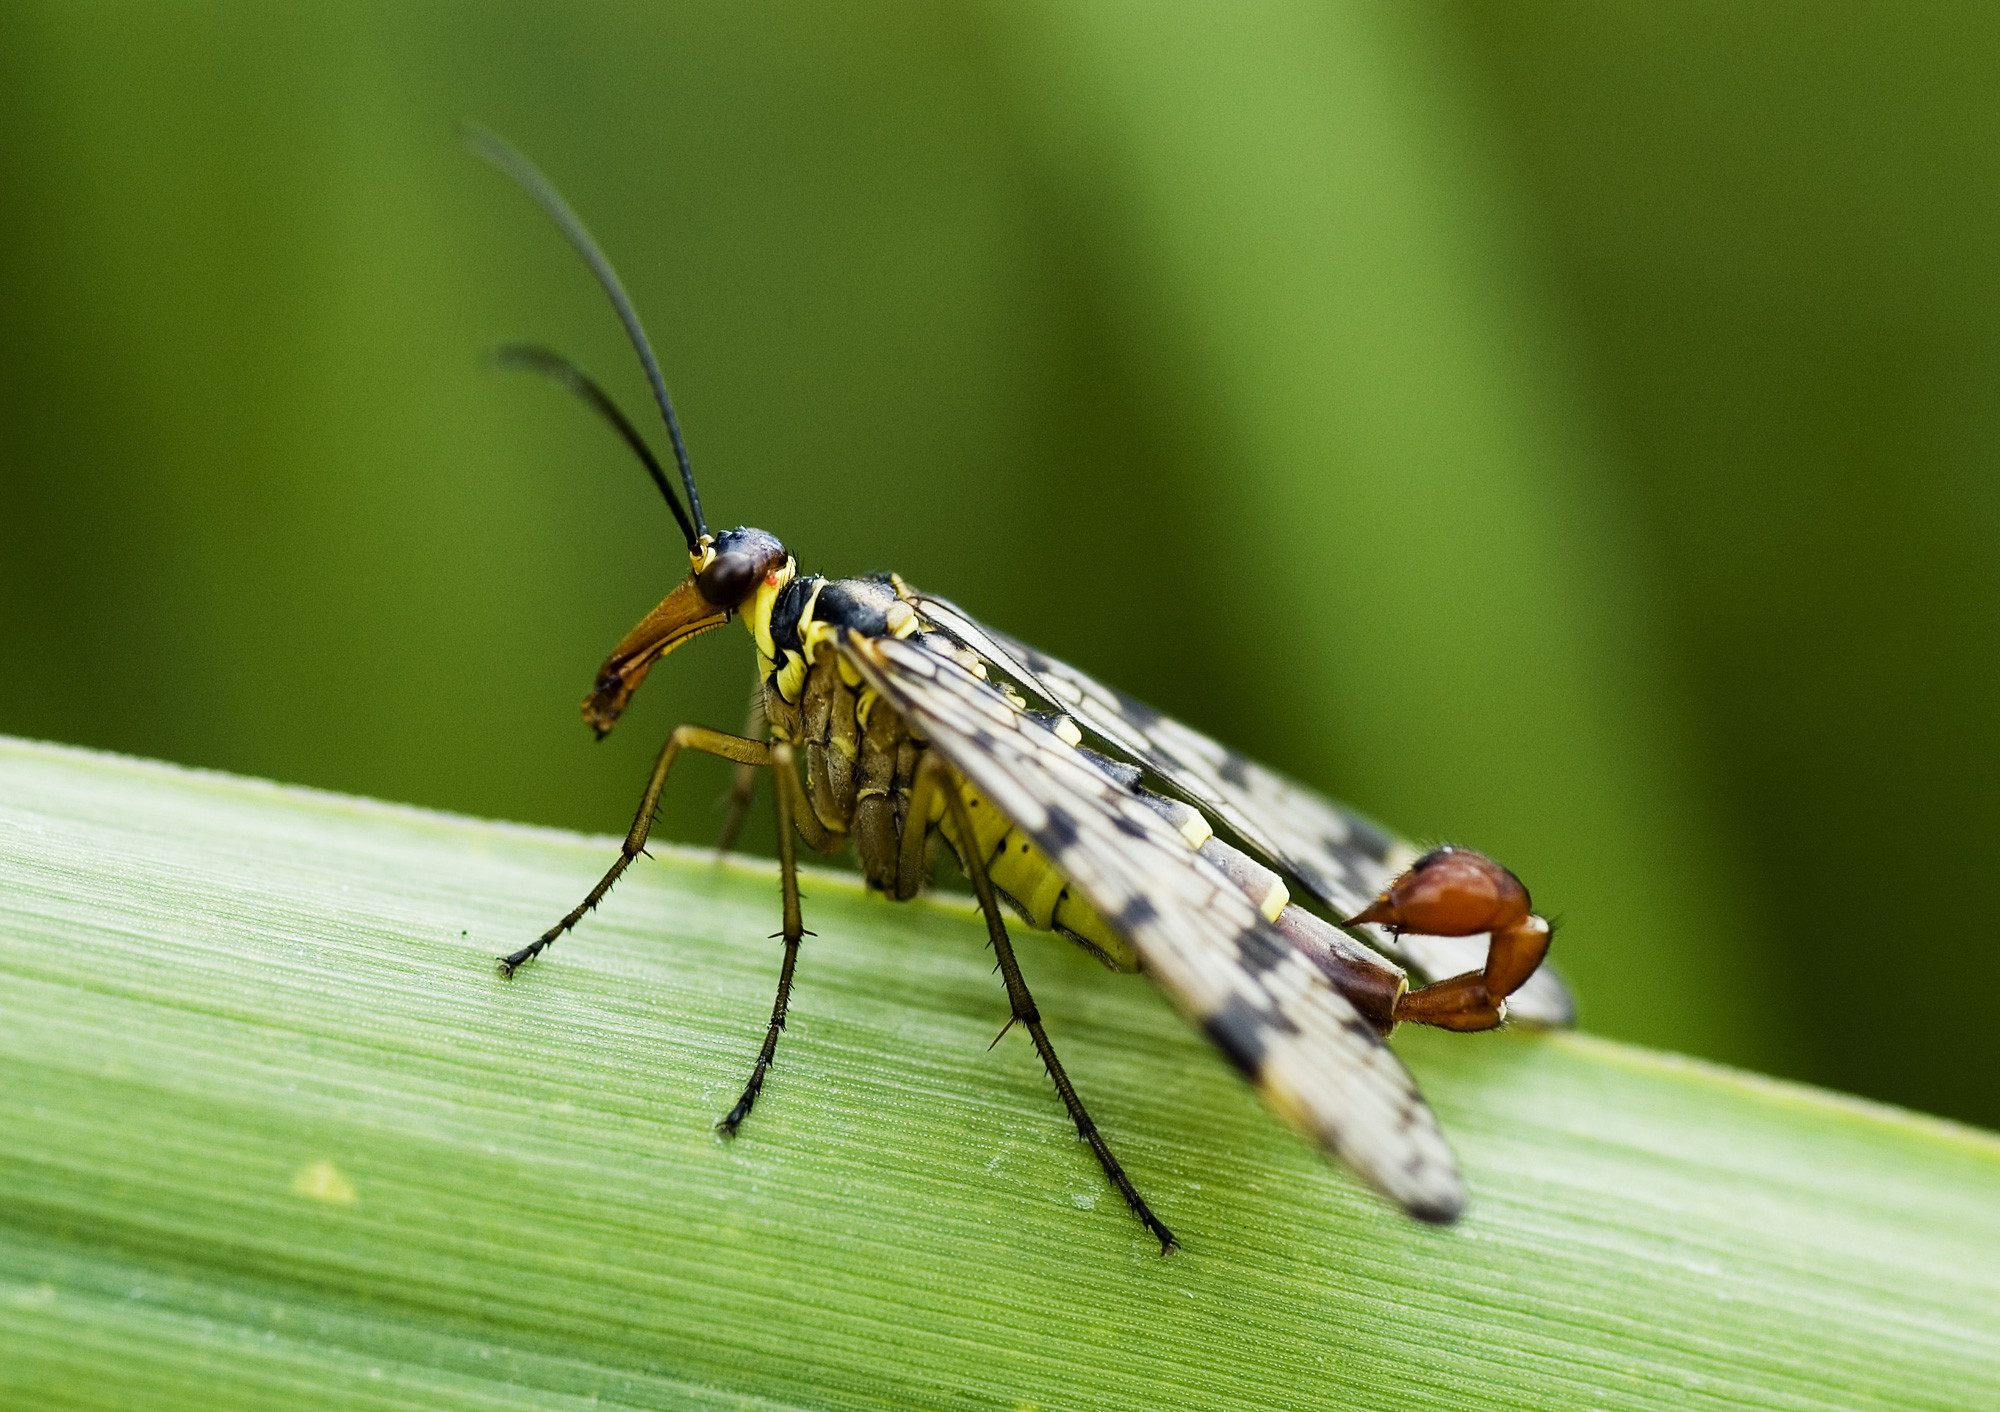 The Scorpionfly - this insect is completely harmless to humans and acts as a regular bee does, pollinating and buzzing.  The obvious "scorpion tail", is actually its genitals. They also steal insects from spider webs and present them to the females as a "box of chocolate".